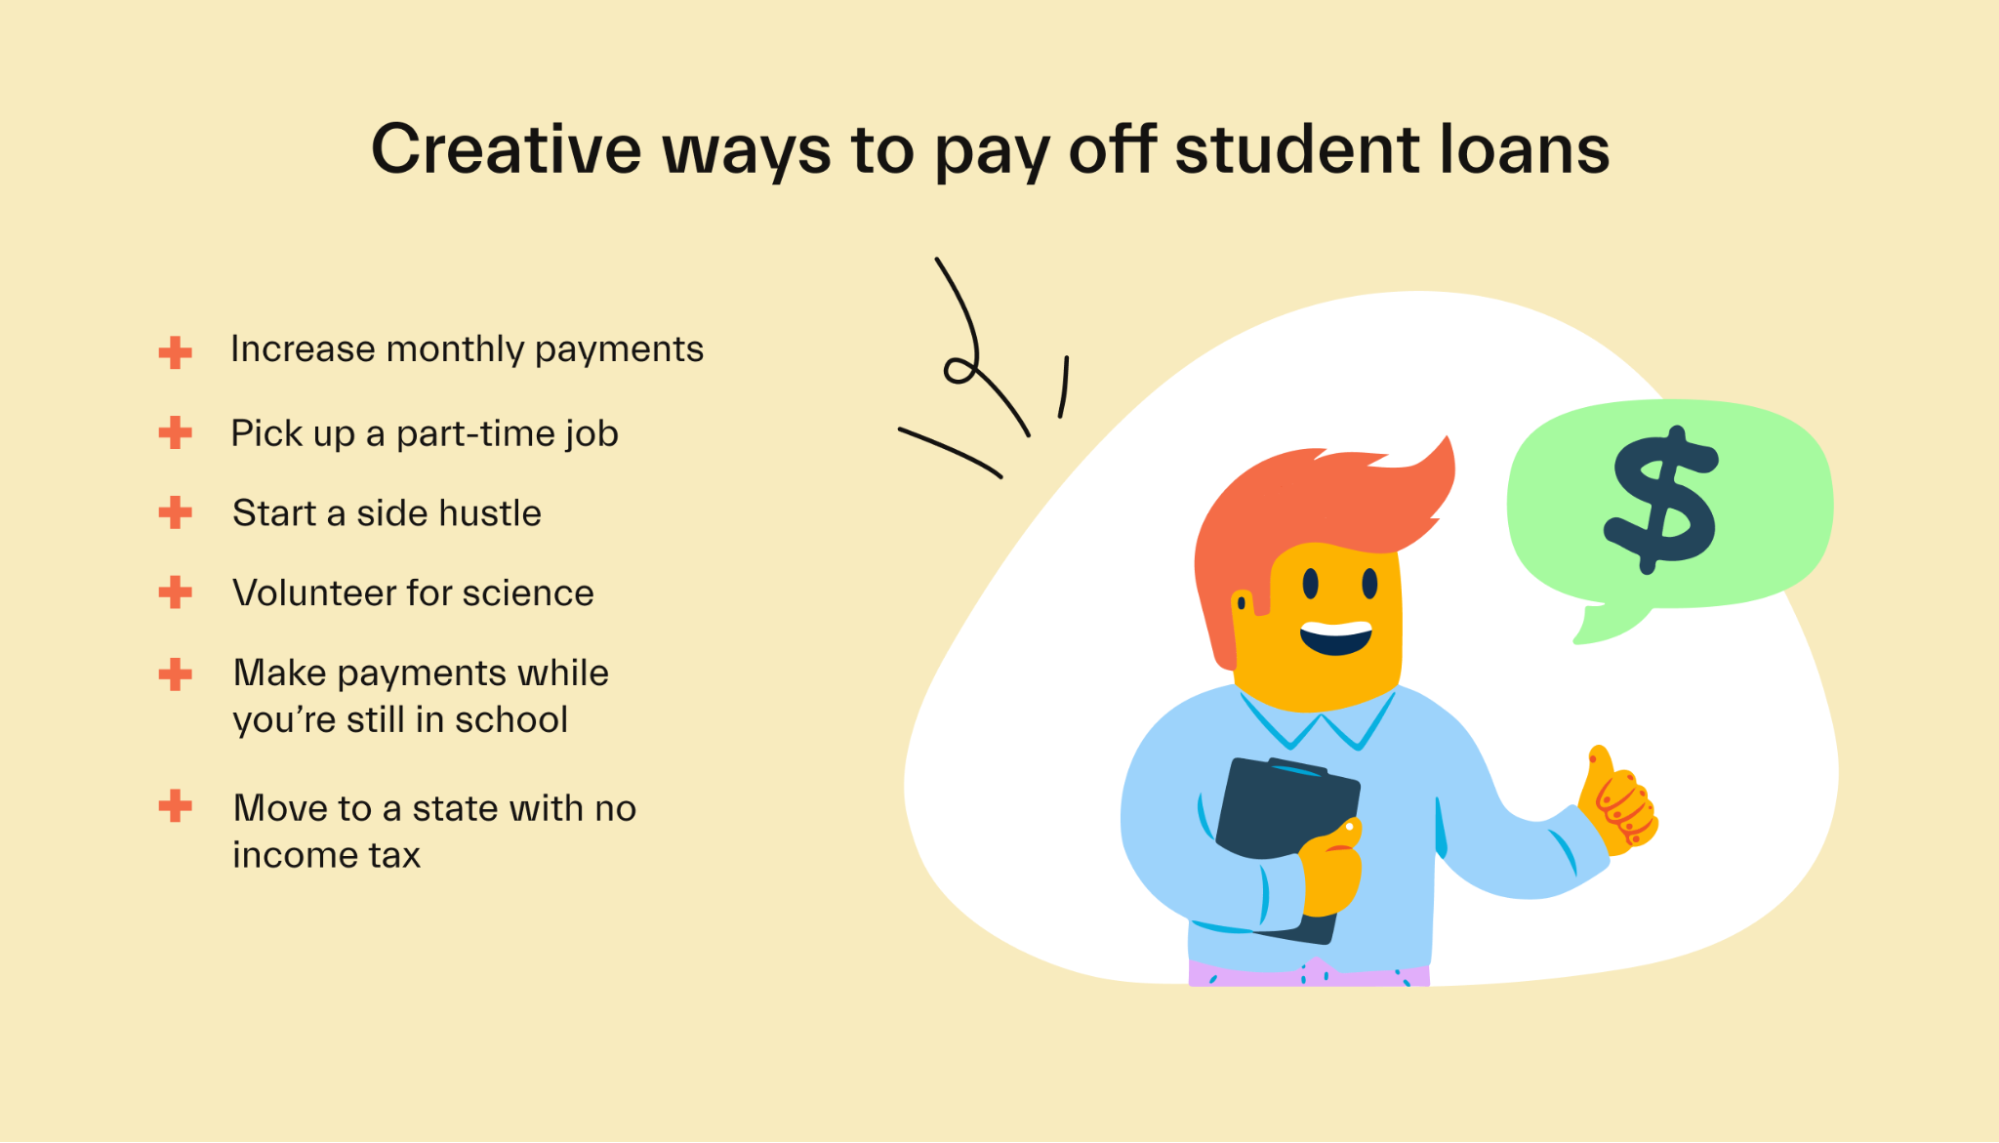 Creative ways to pay off student loans